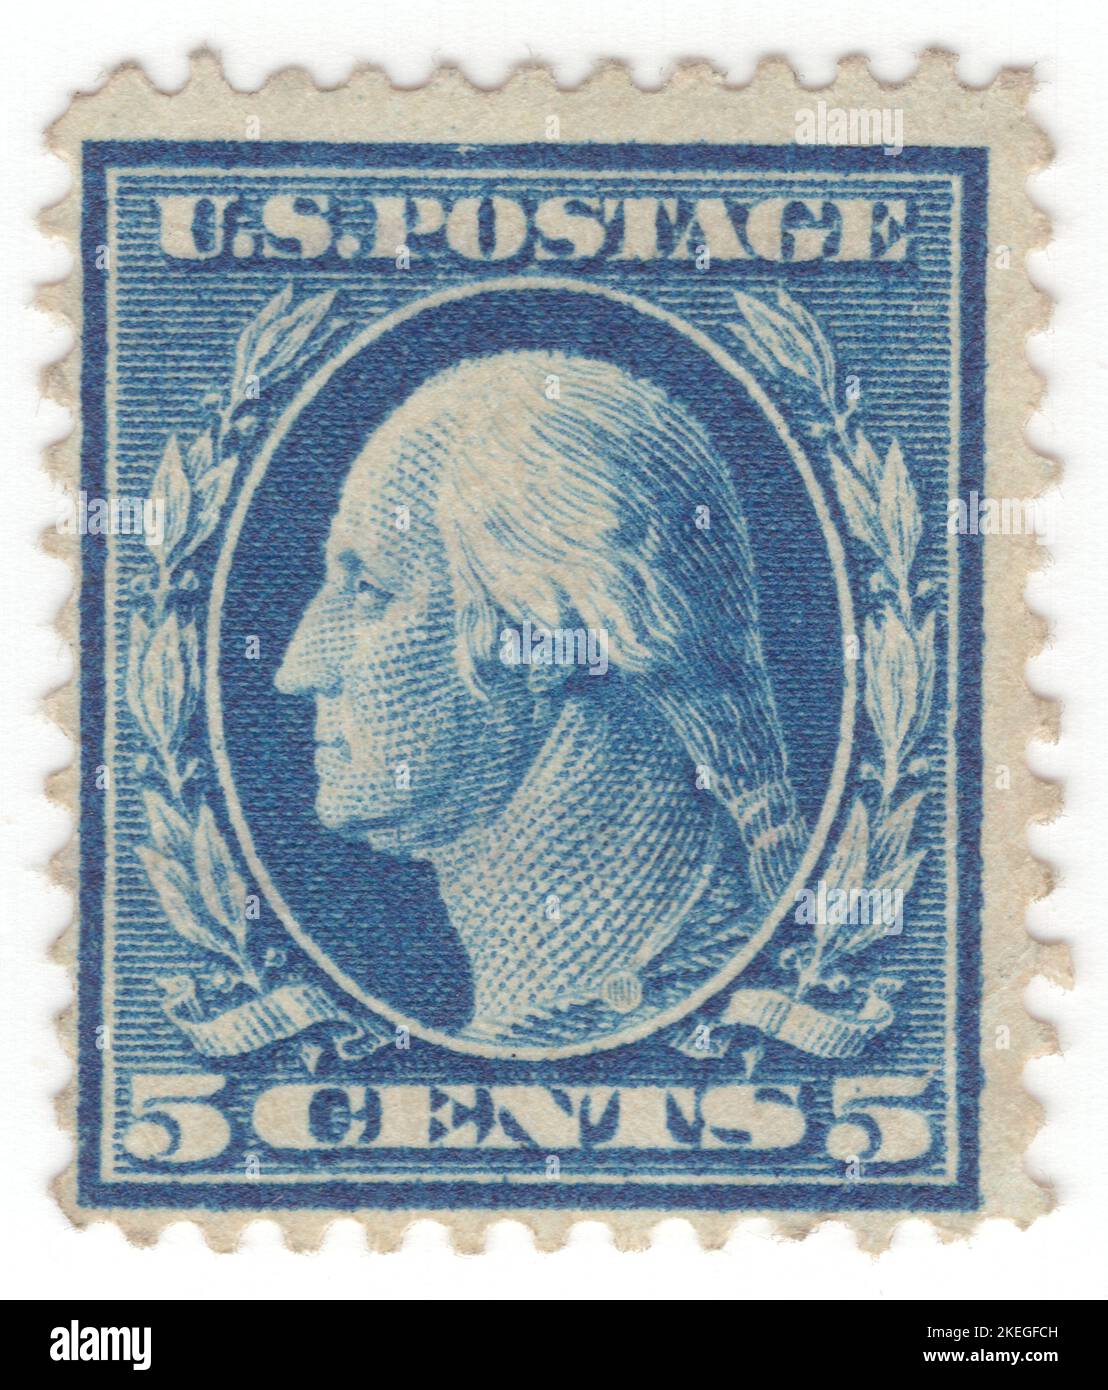 USA - 1911: An 5 cents blue postage stamp depicting portrait of George Washington. American military officer, statesman, and Founding Father who served as the first president of the United States from 1789 to 1797. Appointed by the Continental Congress as commander of the Continental Army, Washington led the Patriot forces to victory in the American Revolutionary War and served as the president of the Constitutional Convention of 1787, which created the Constitution of the United States and the American federal government. Washington has been called the 'Father of his Country' Stock Photo